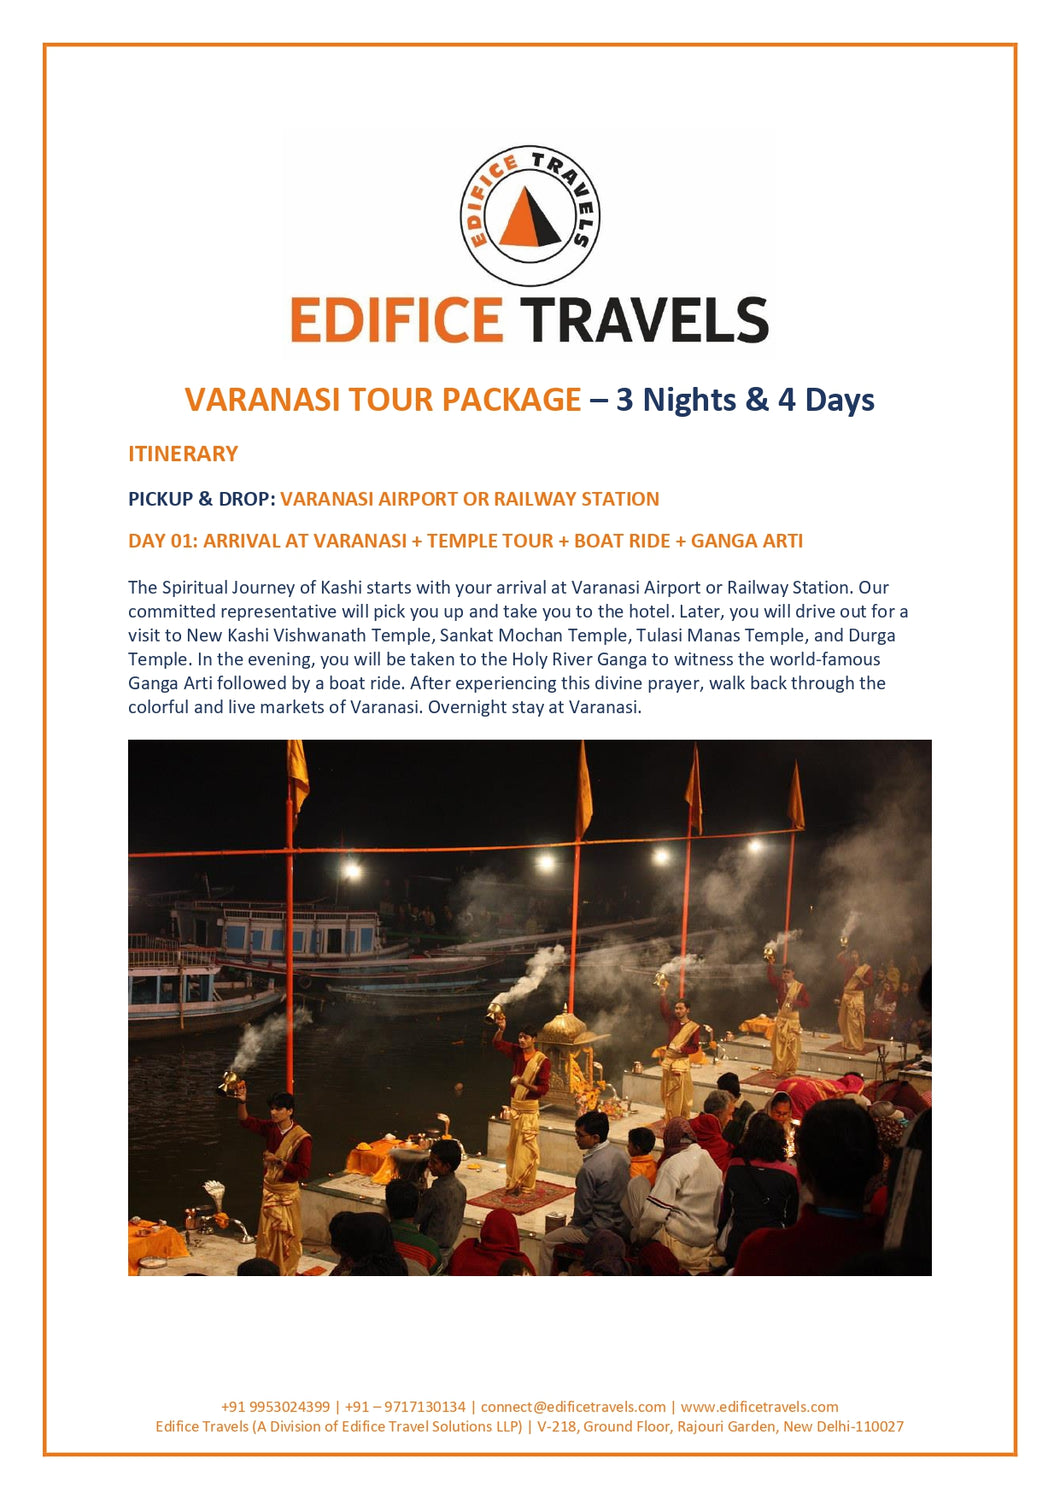 Varanasi Tour Package - 3 Nights & 4 Days - 3 Star Hotel Category